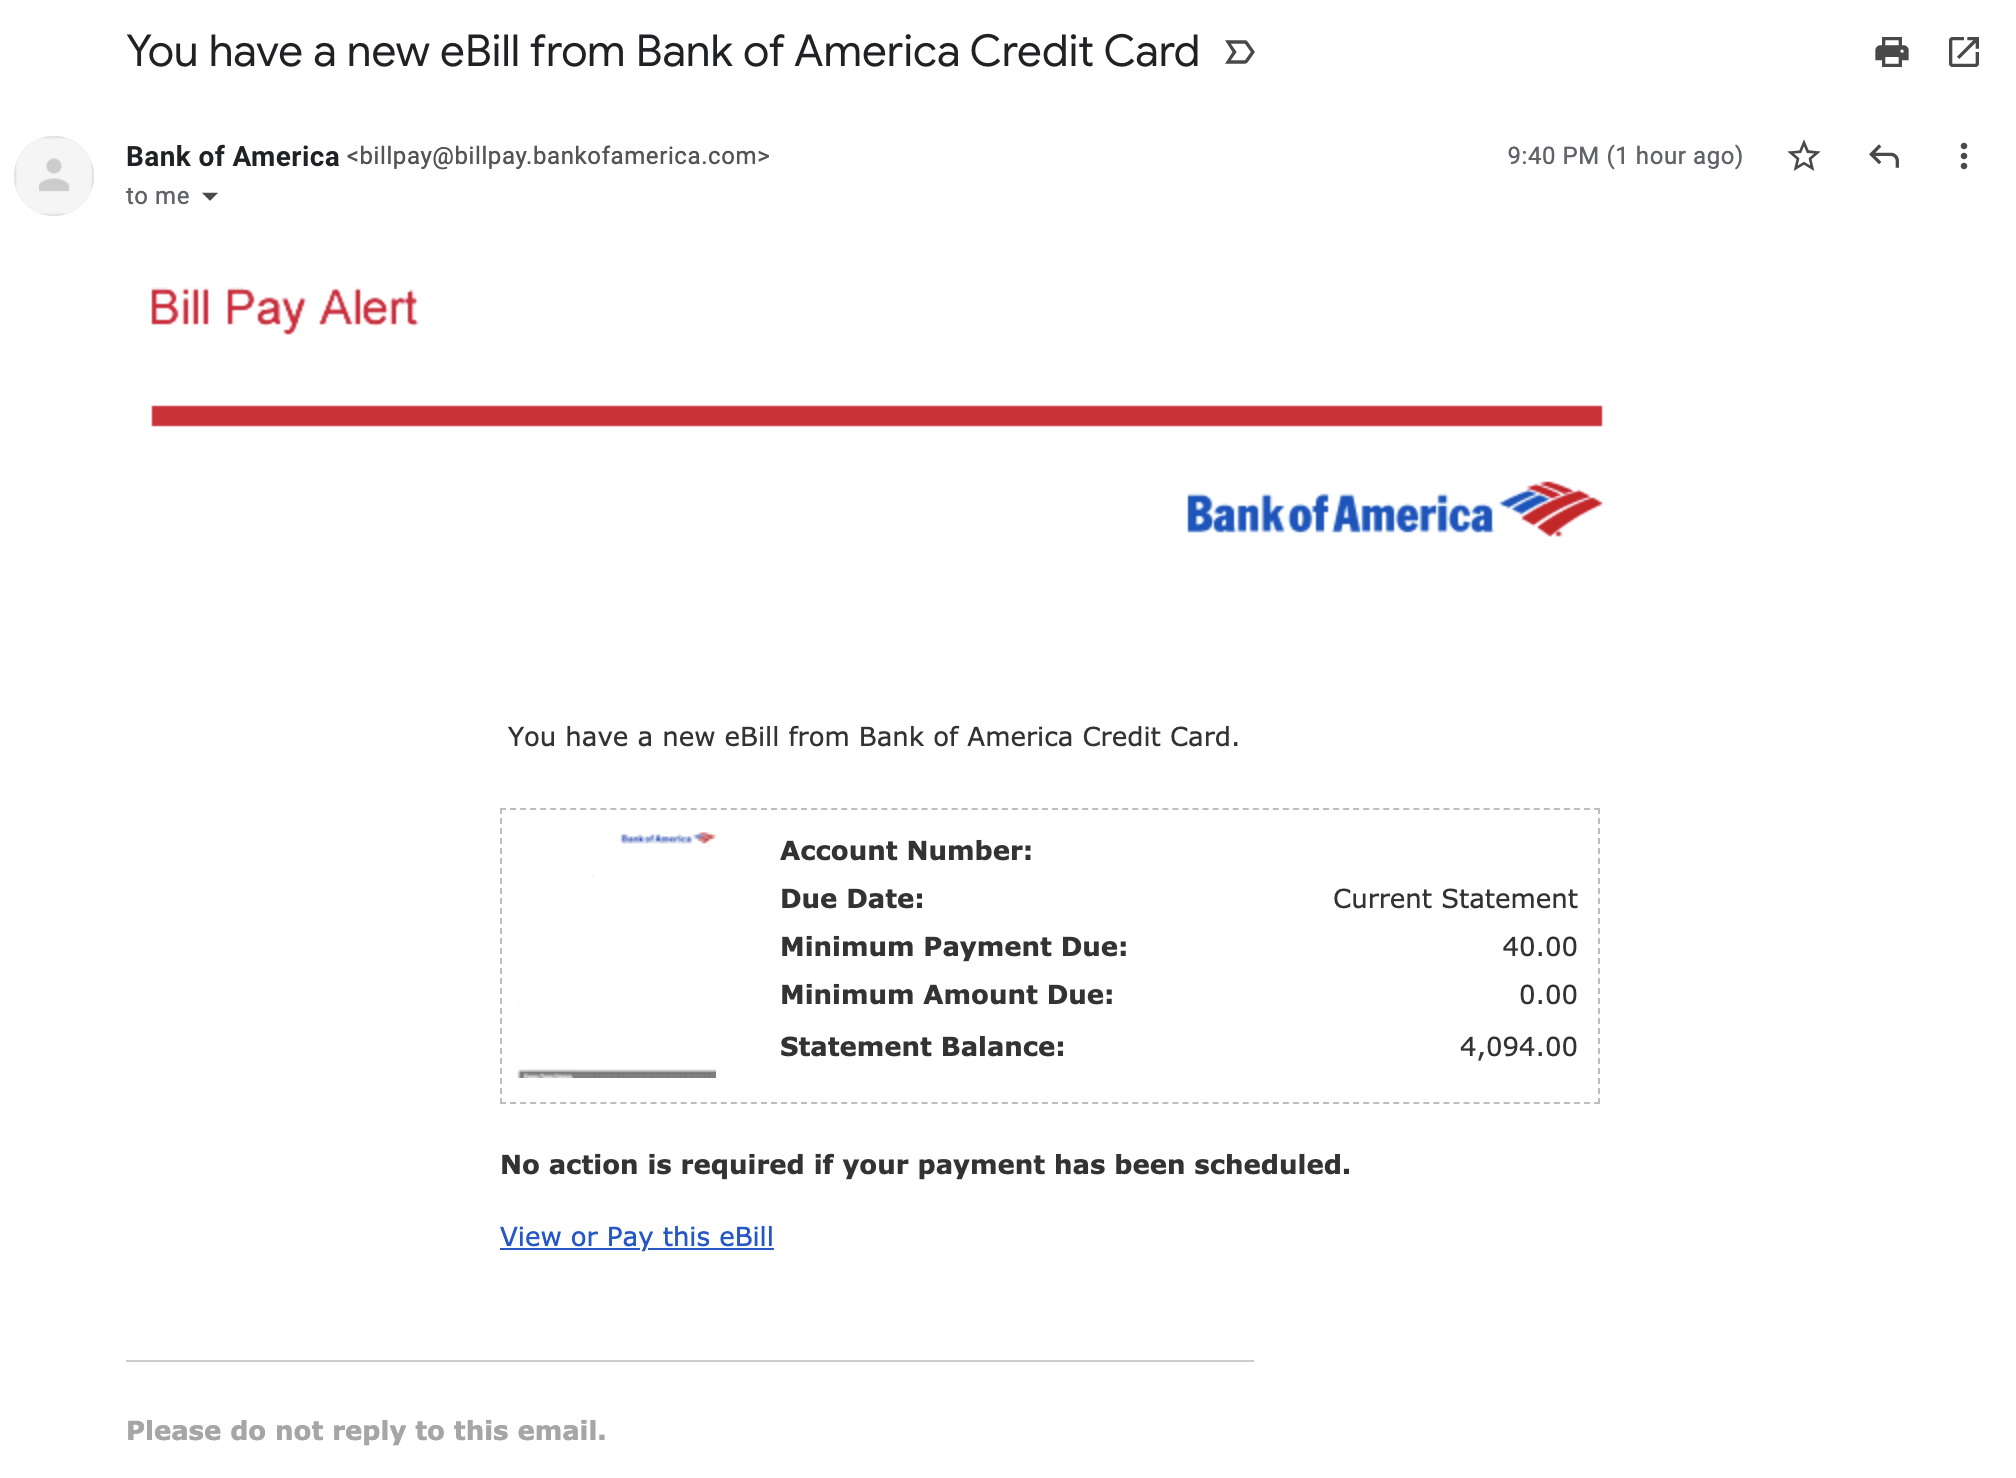 How to set up autopay for Bank of America credit cards DEM Flyers